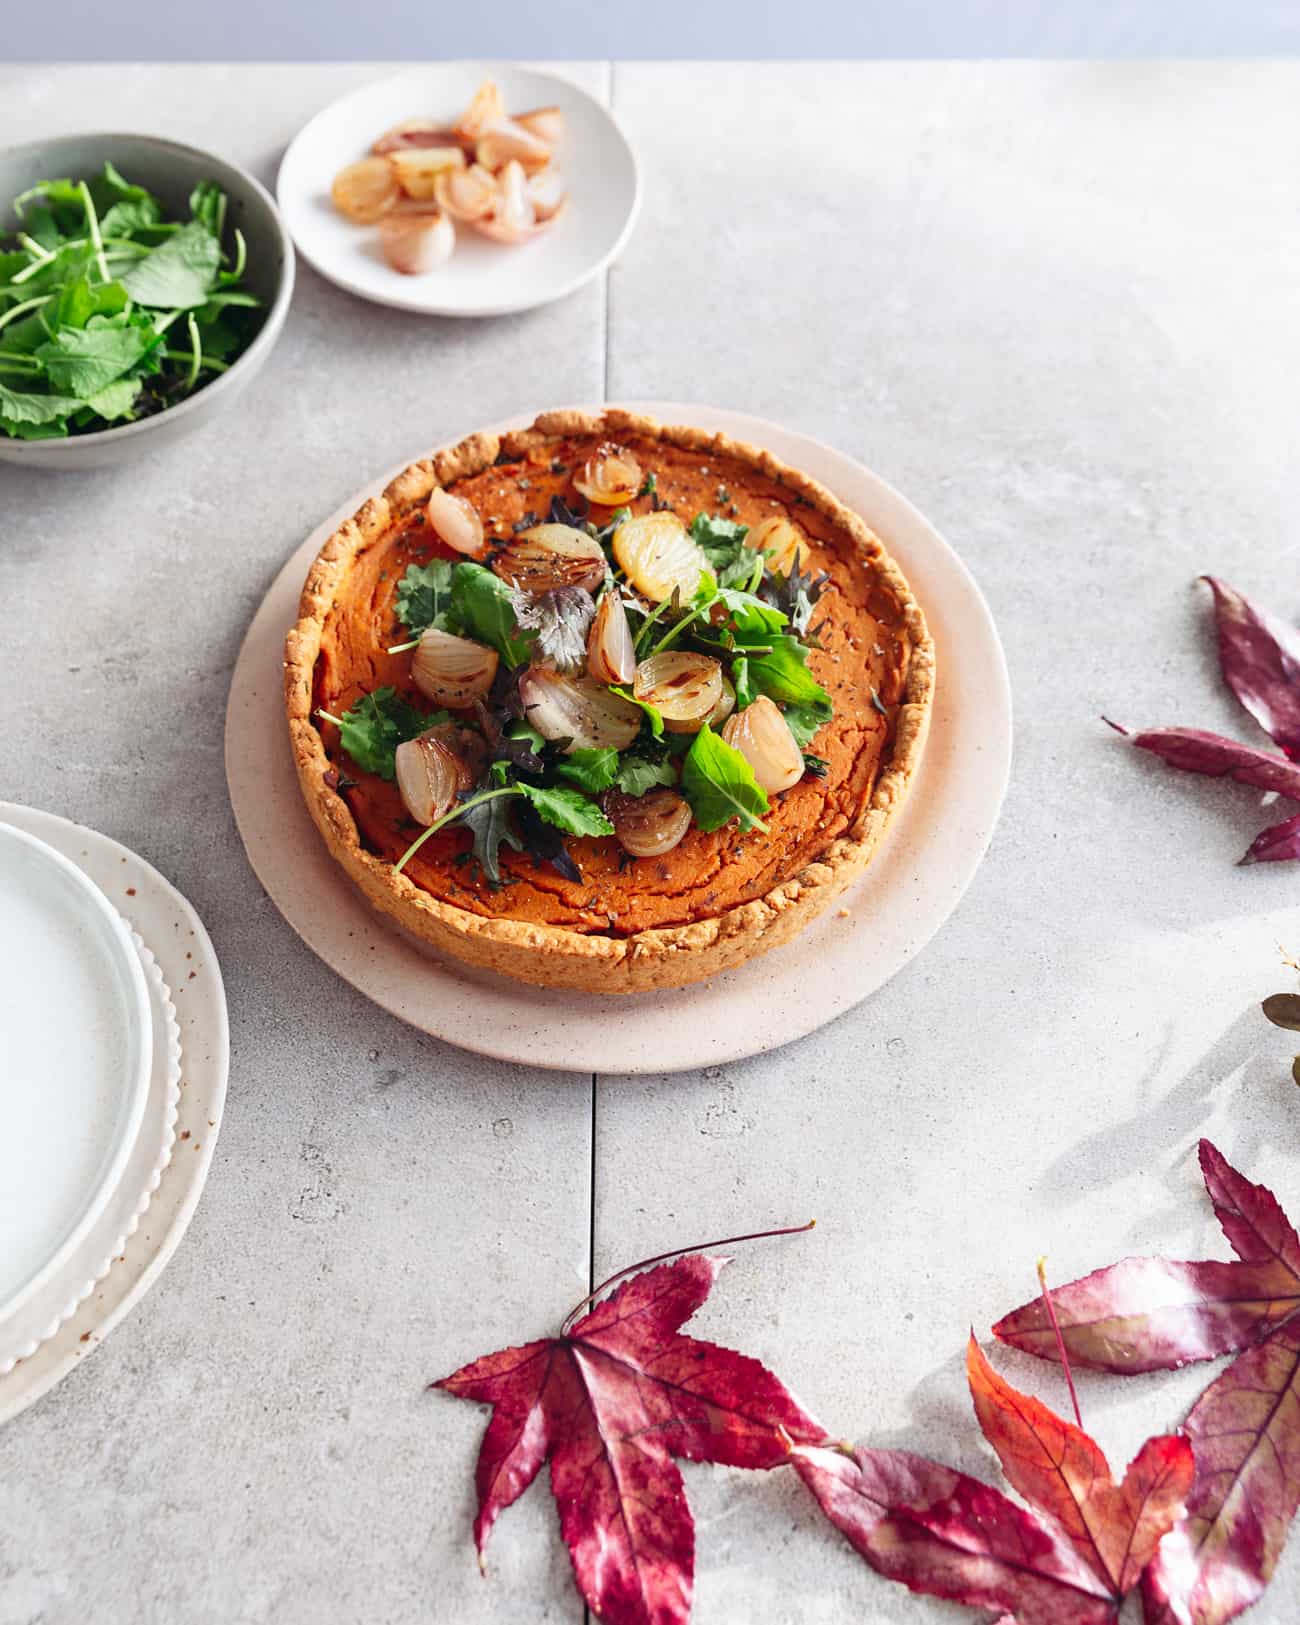 A squash tart with bowls of caramelised shallots and baby kale